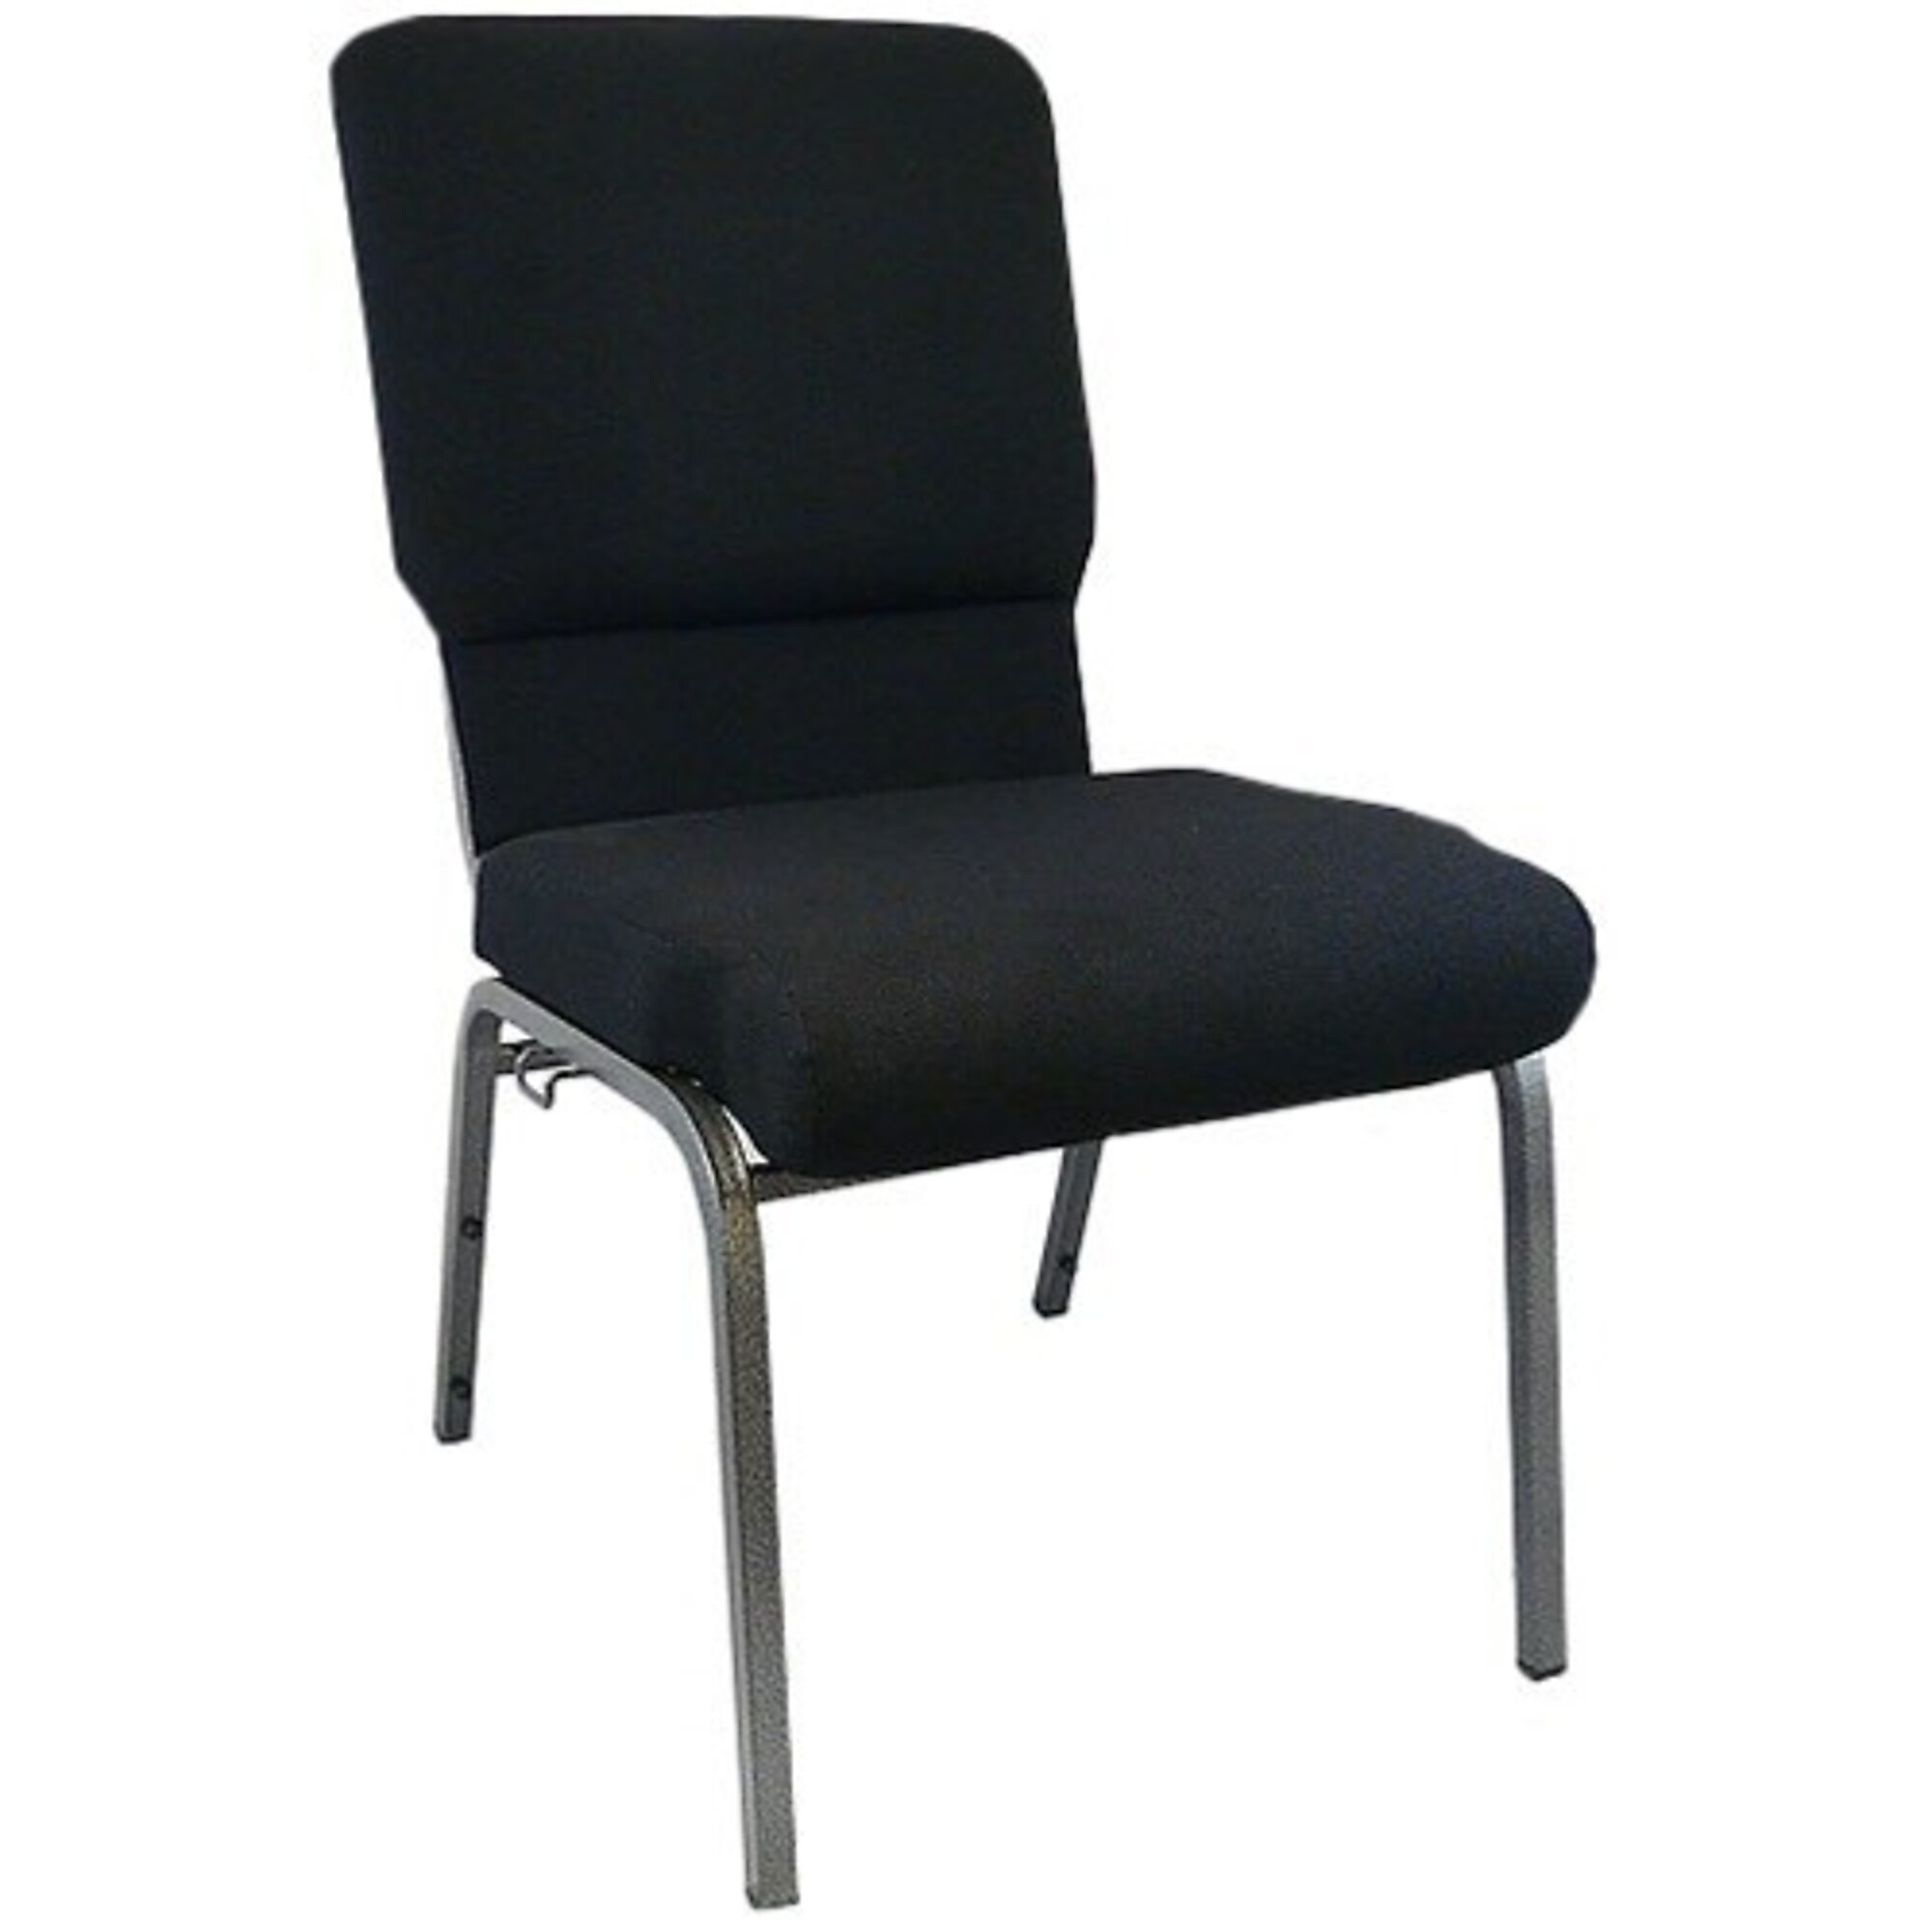 Flash Furniture, Black Church Chairs 18.5Inch Wide, Primary Color Black, Included (qty.) 1, Model PCHT185108